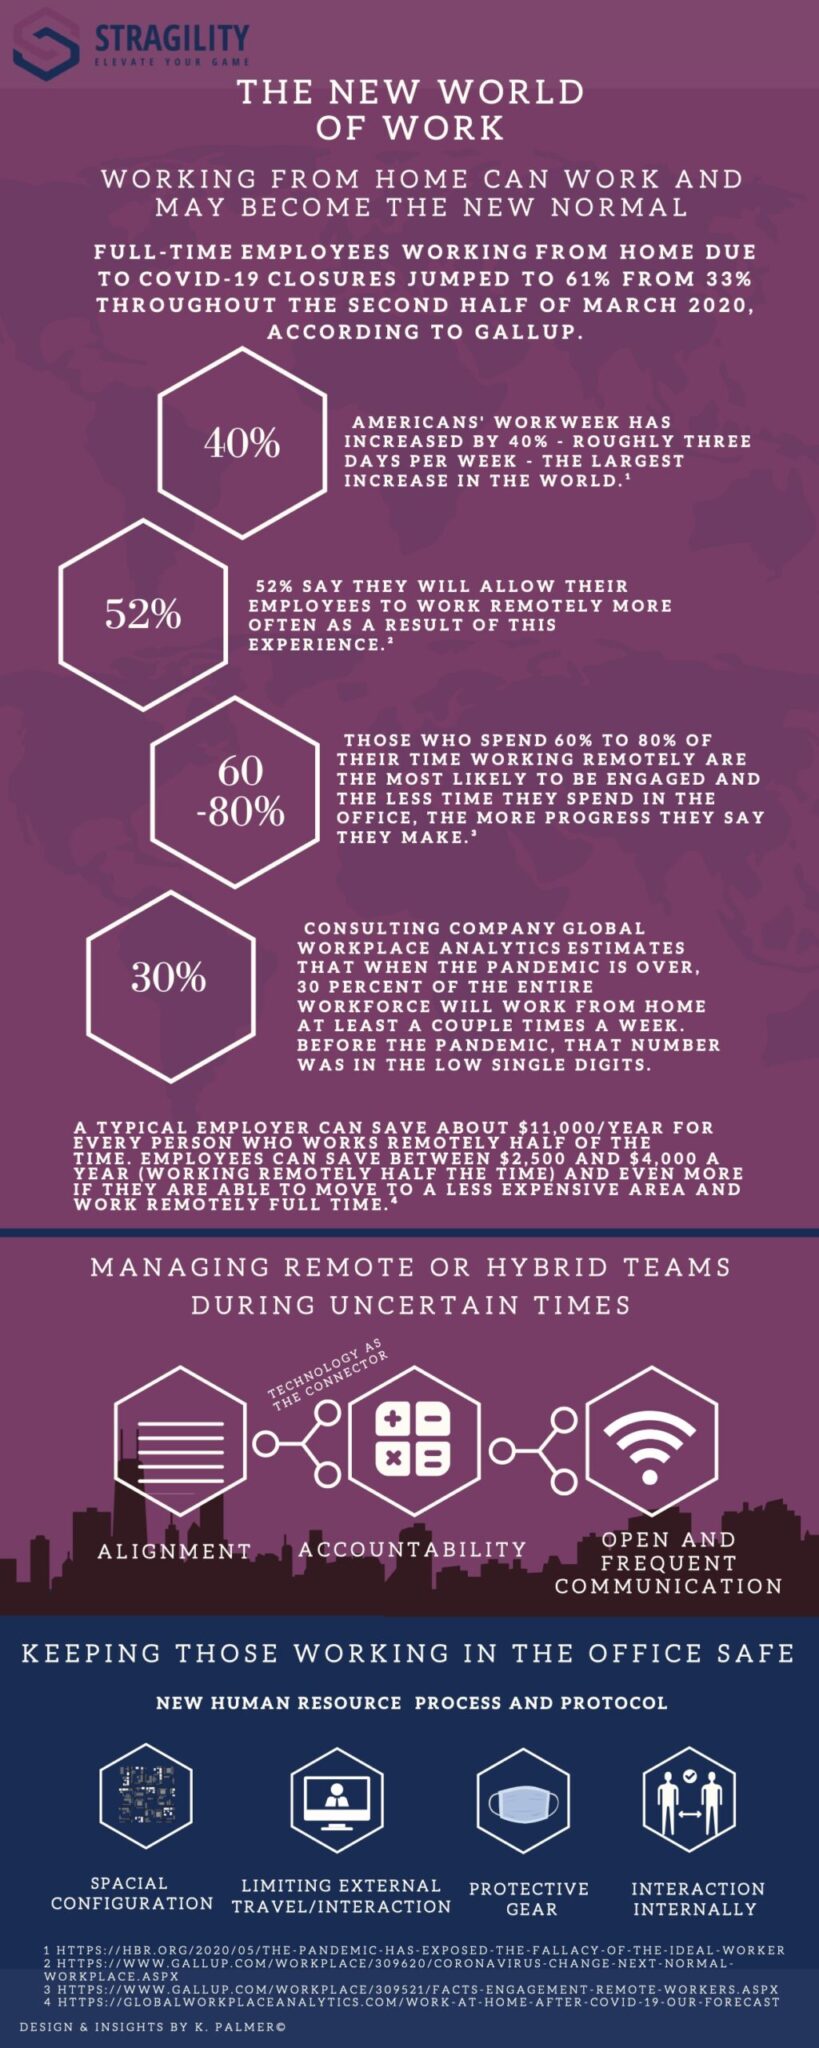 An infographic with stats explaining how American’s working habits have changed during the COVID pandemic